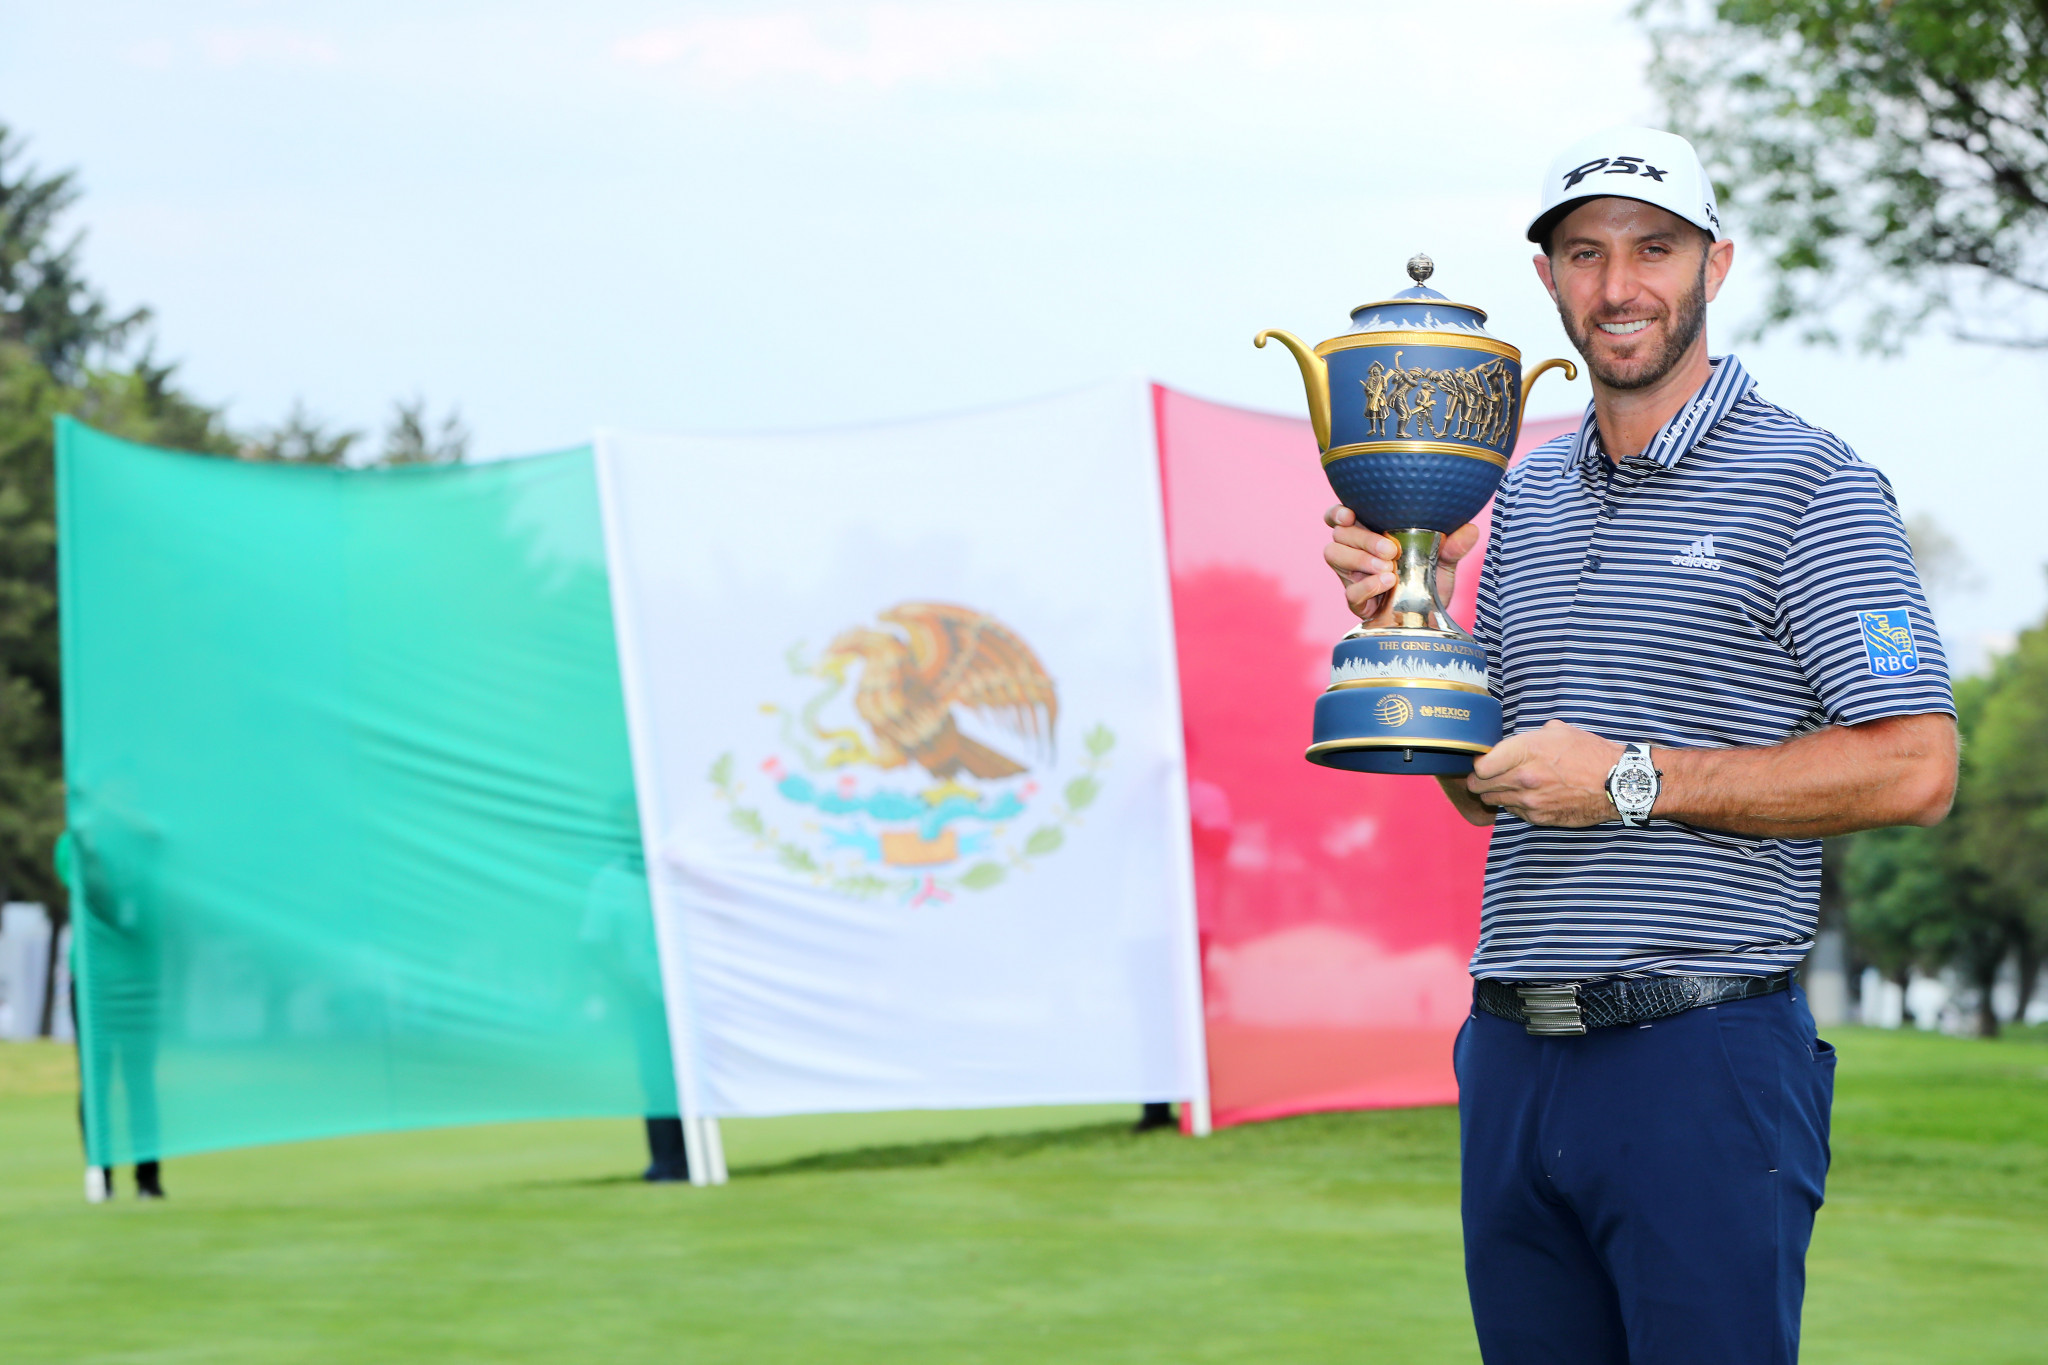 Johnson secures 20th PGA Tour title with victory at WGC-Mexico Championship